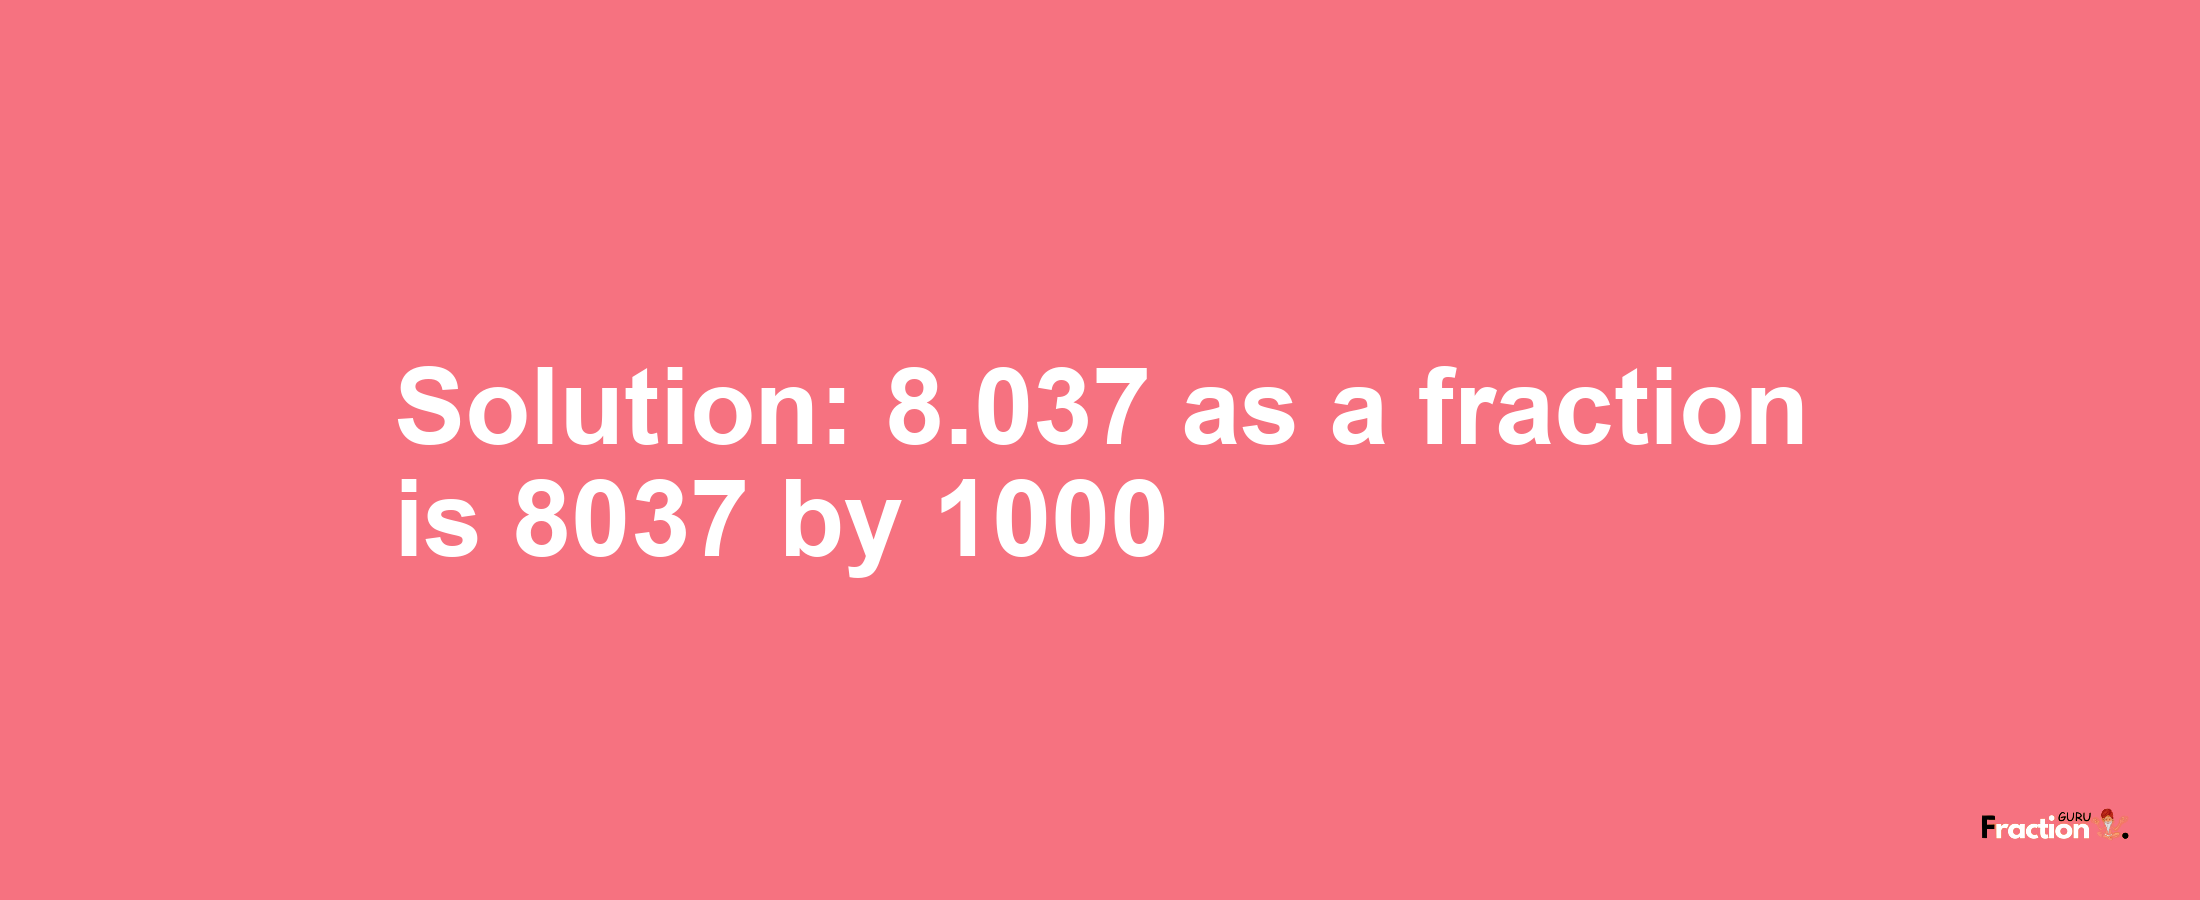 Solution:8.037 as a fraction is 8037/1000